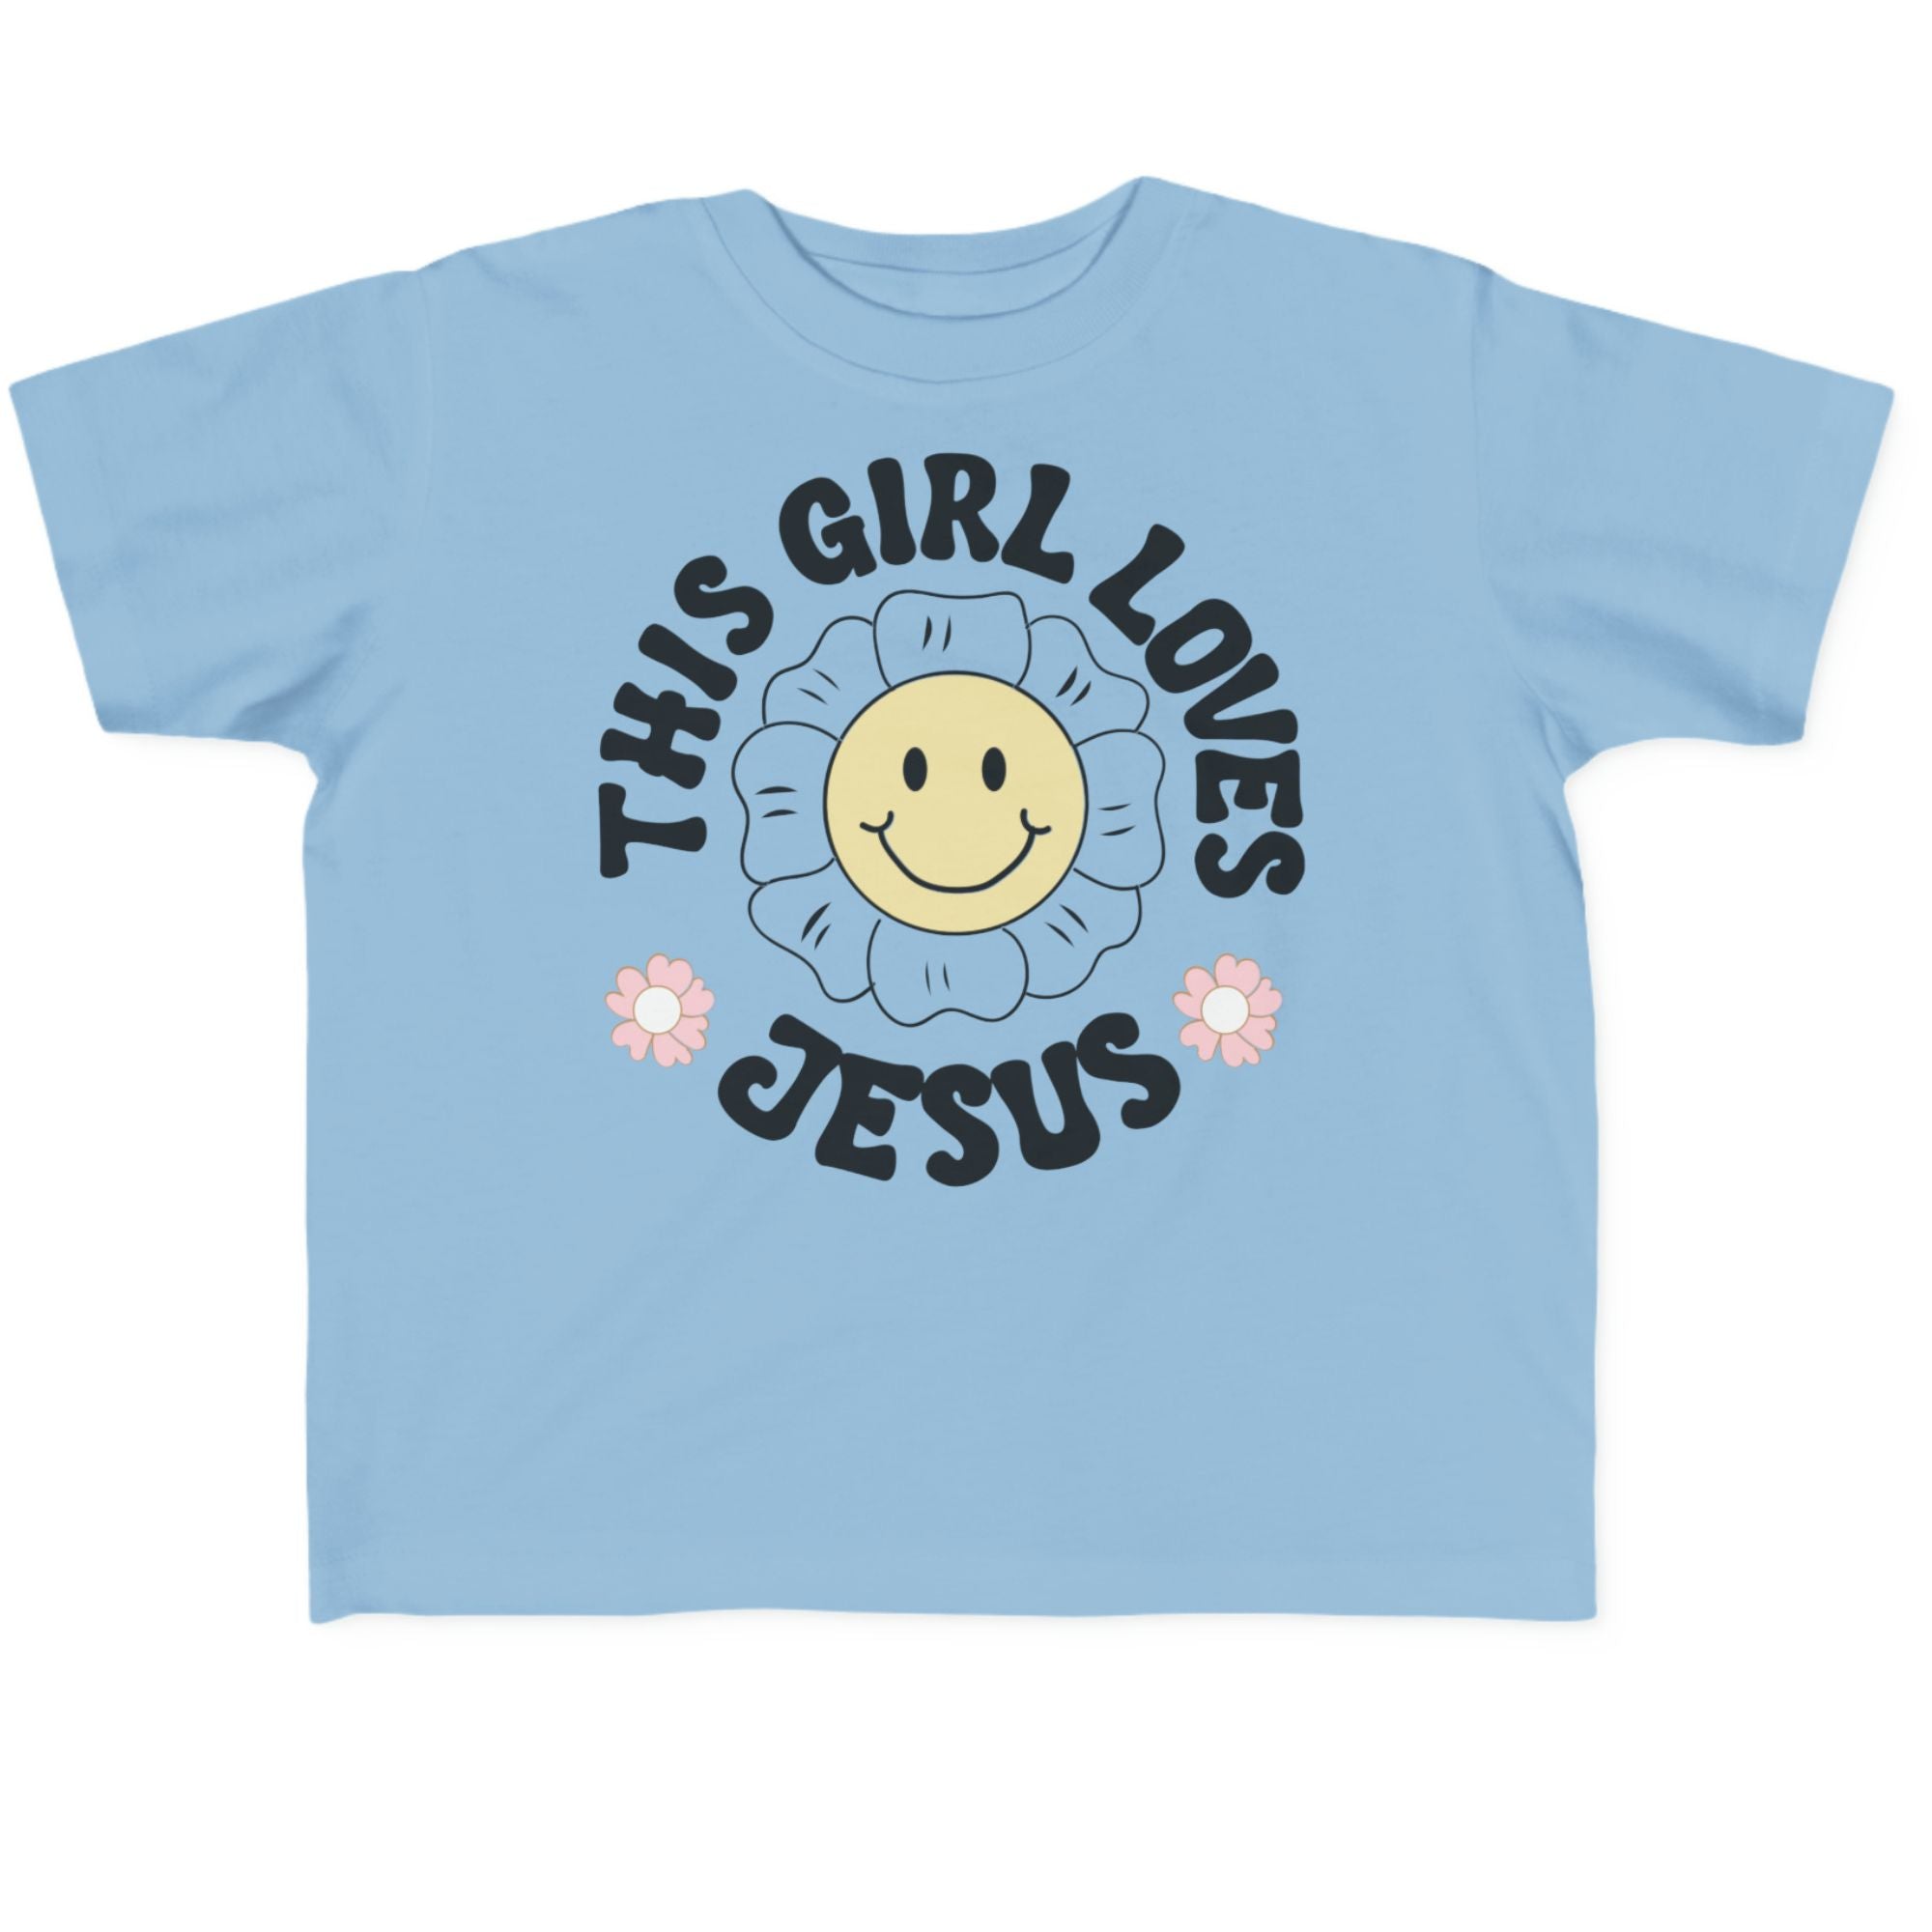 This Girl Loves Jesus Toddler's Fine Jersey Tee Color: Light Blue Size: 2T Jesus Passion Apparel